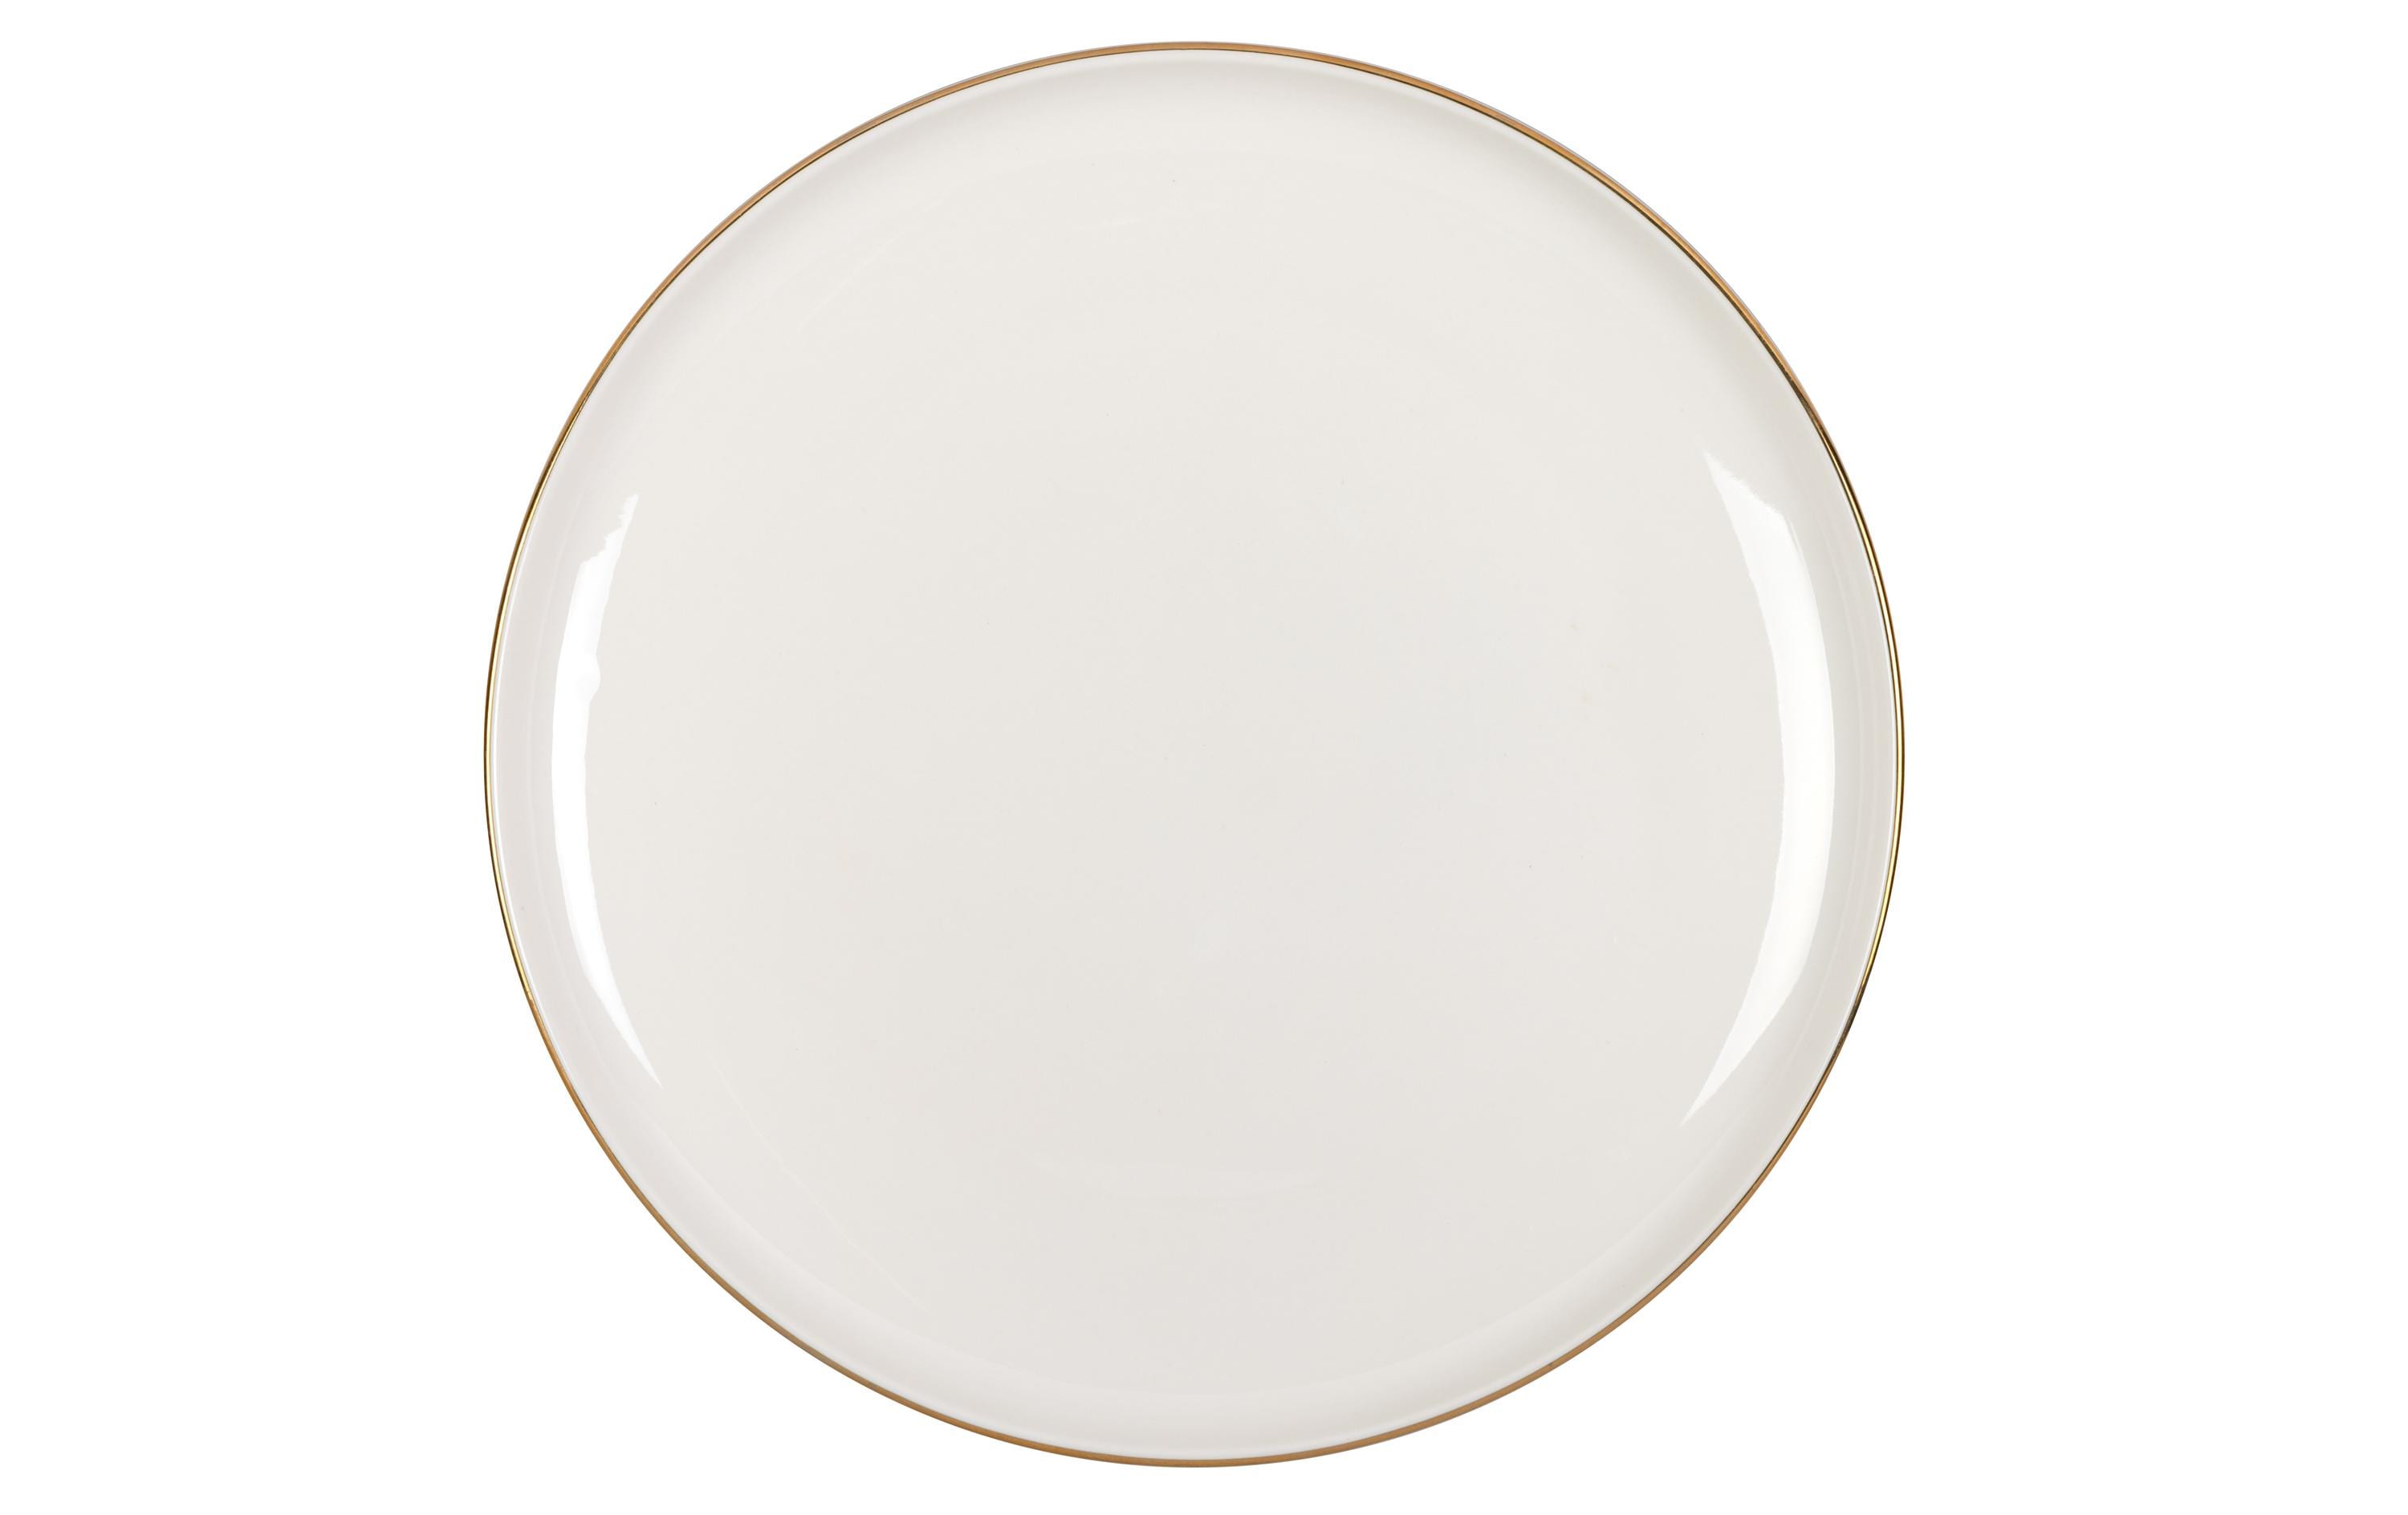 FURBER Speise-Service 20-teilig, Weiss/Gold